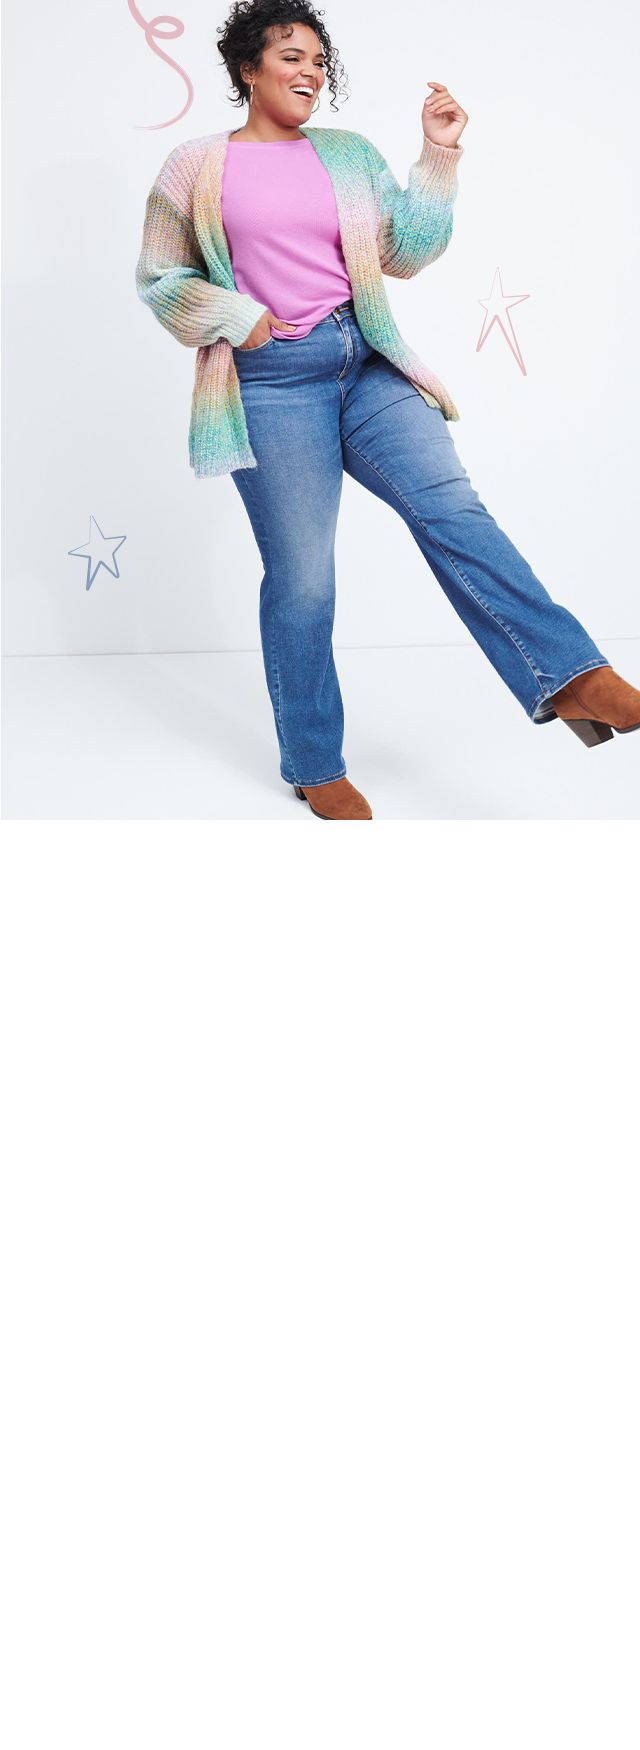 jeans hero image two